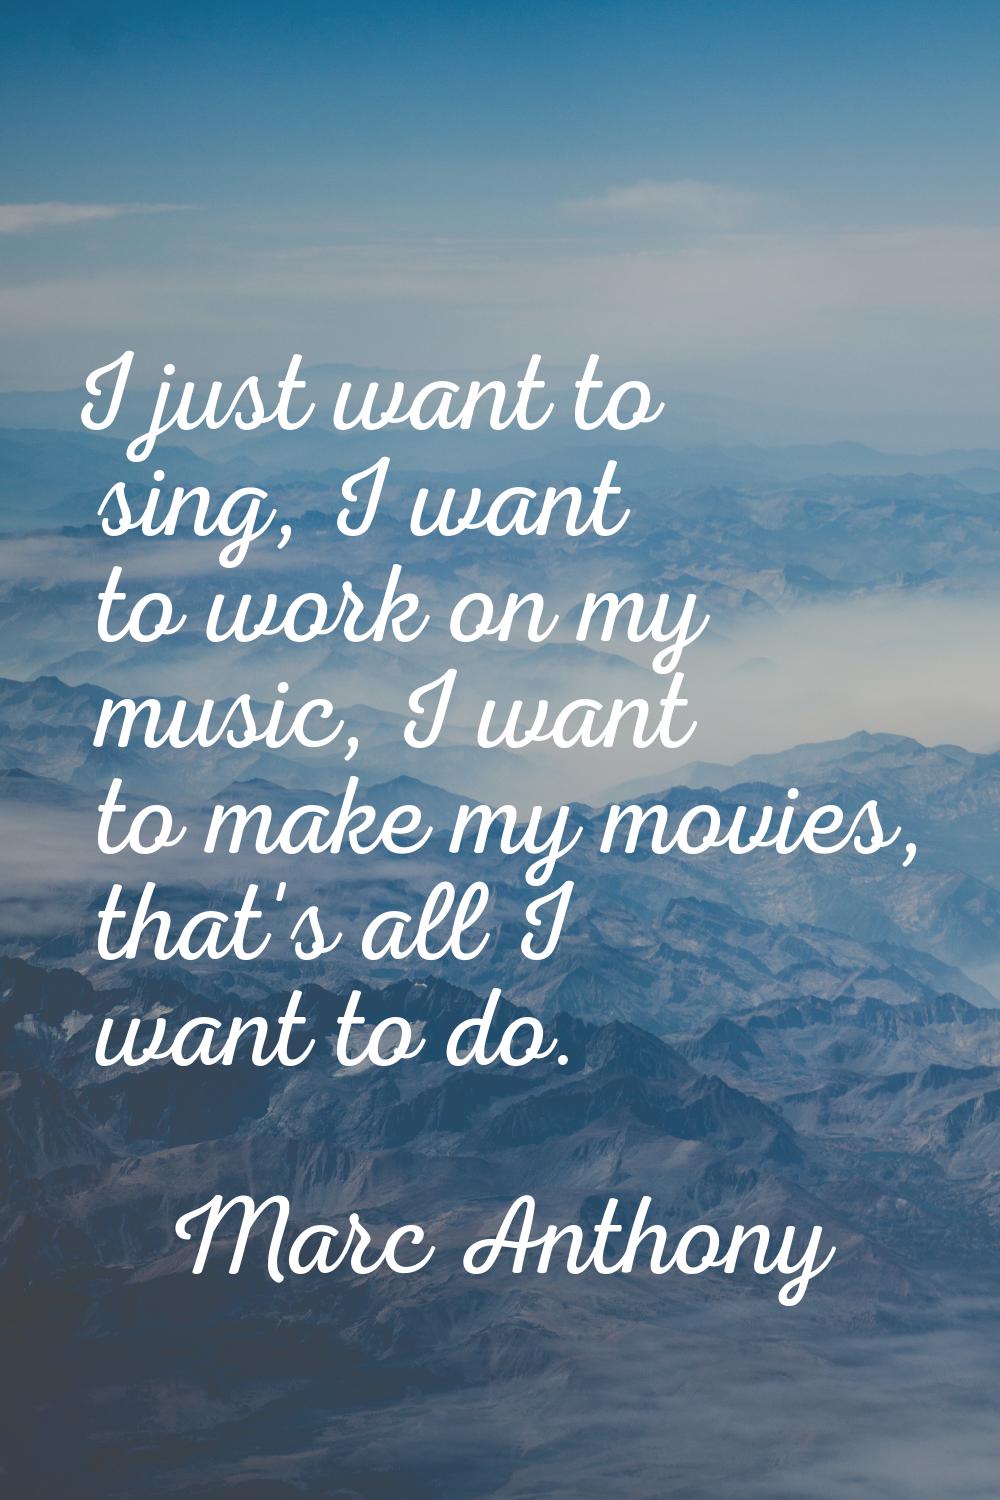 I just want to sing, I want to work on my music, I want to make my movies, that's all I want to do.